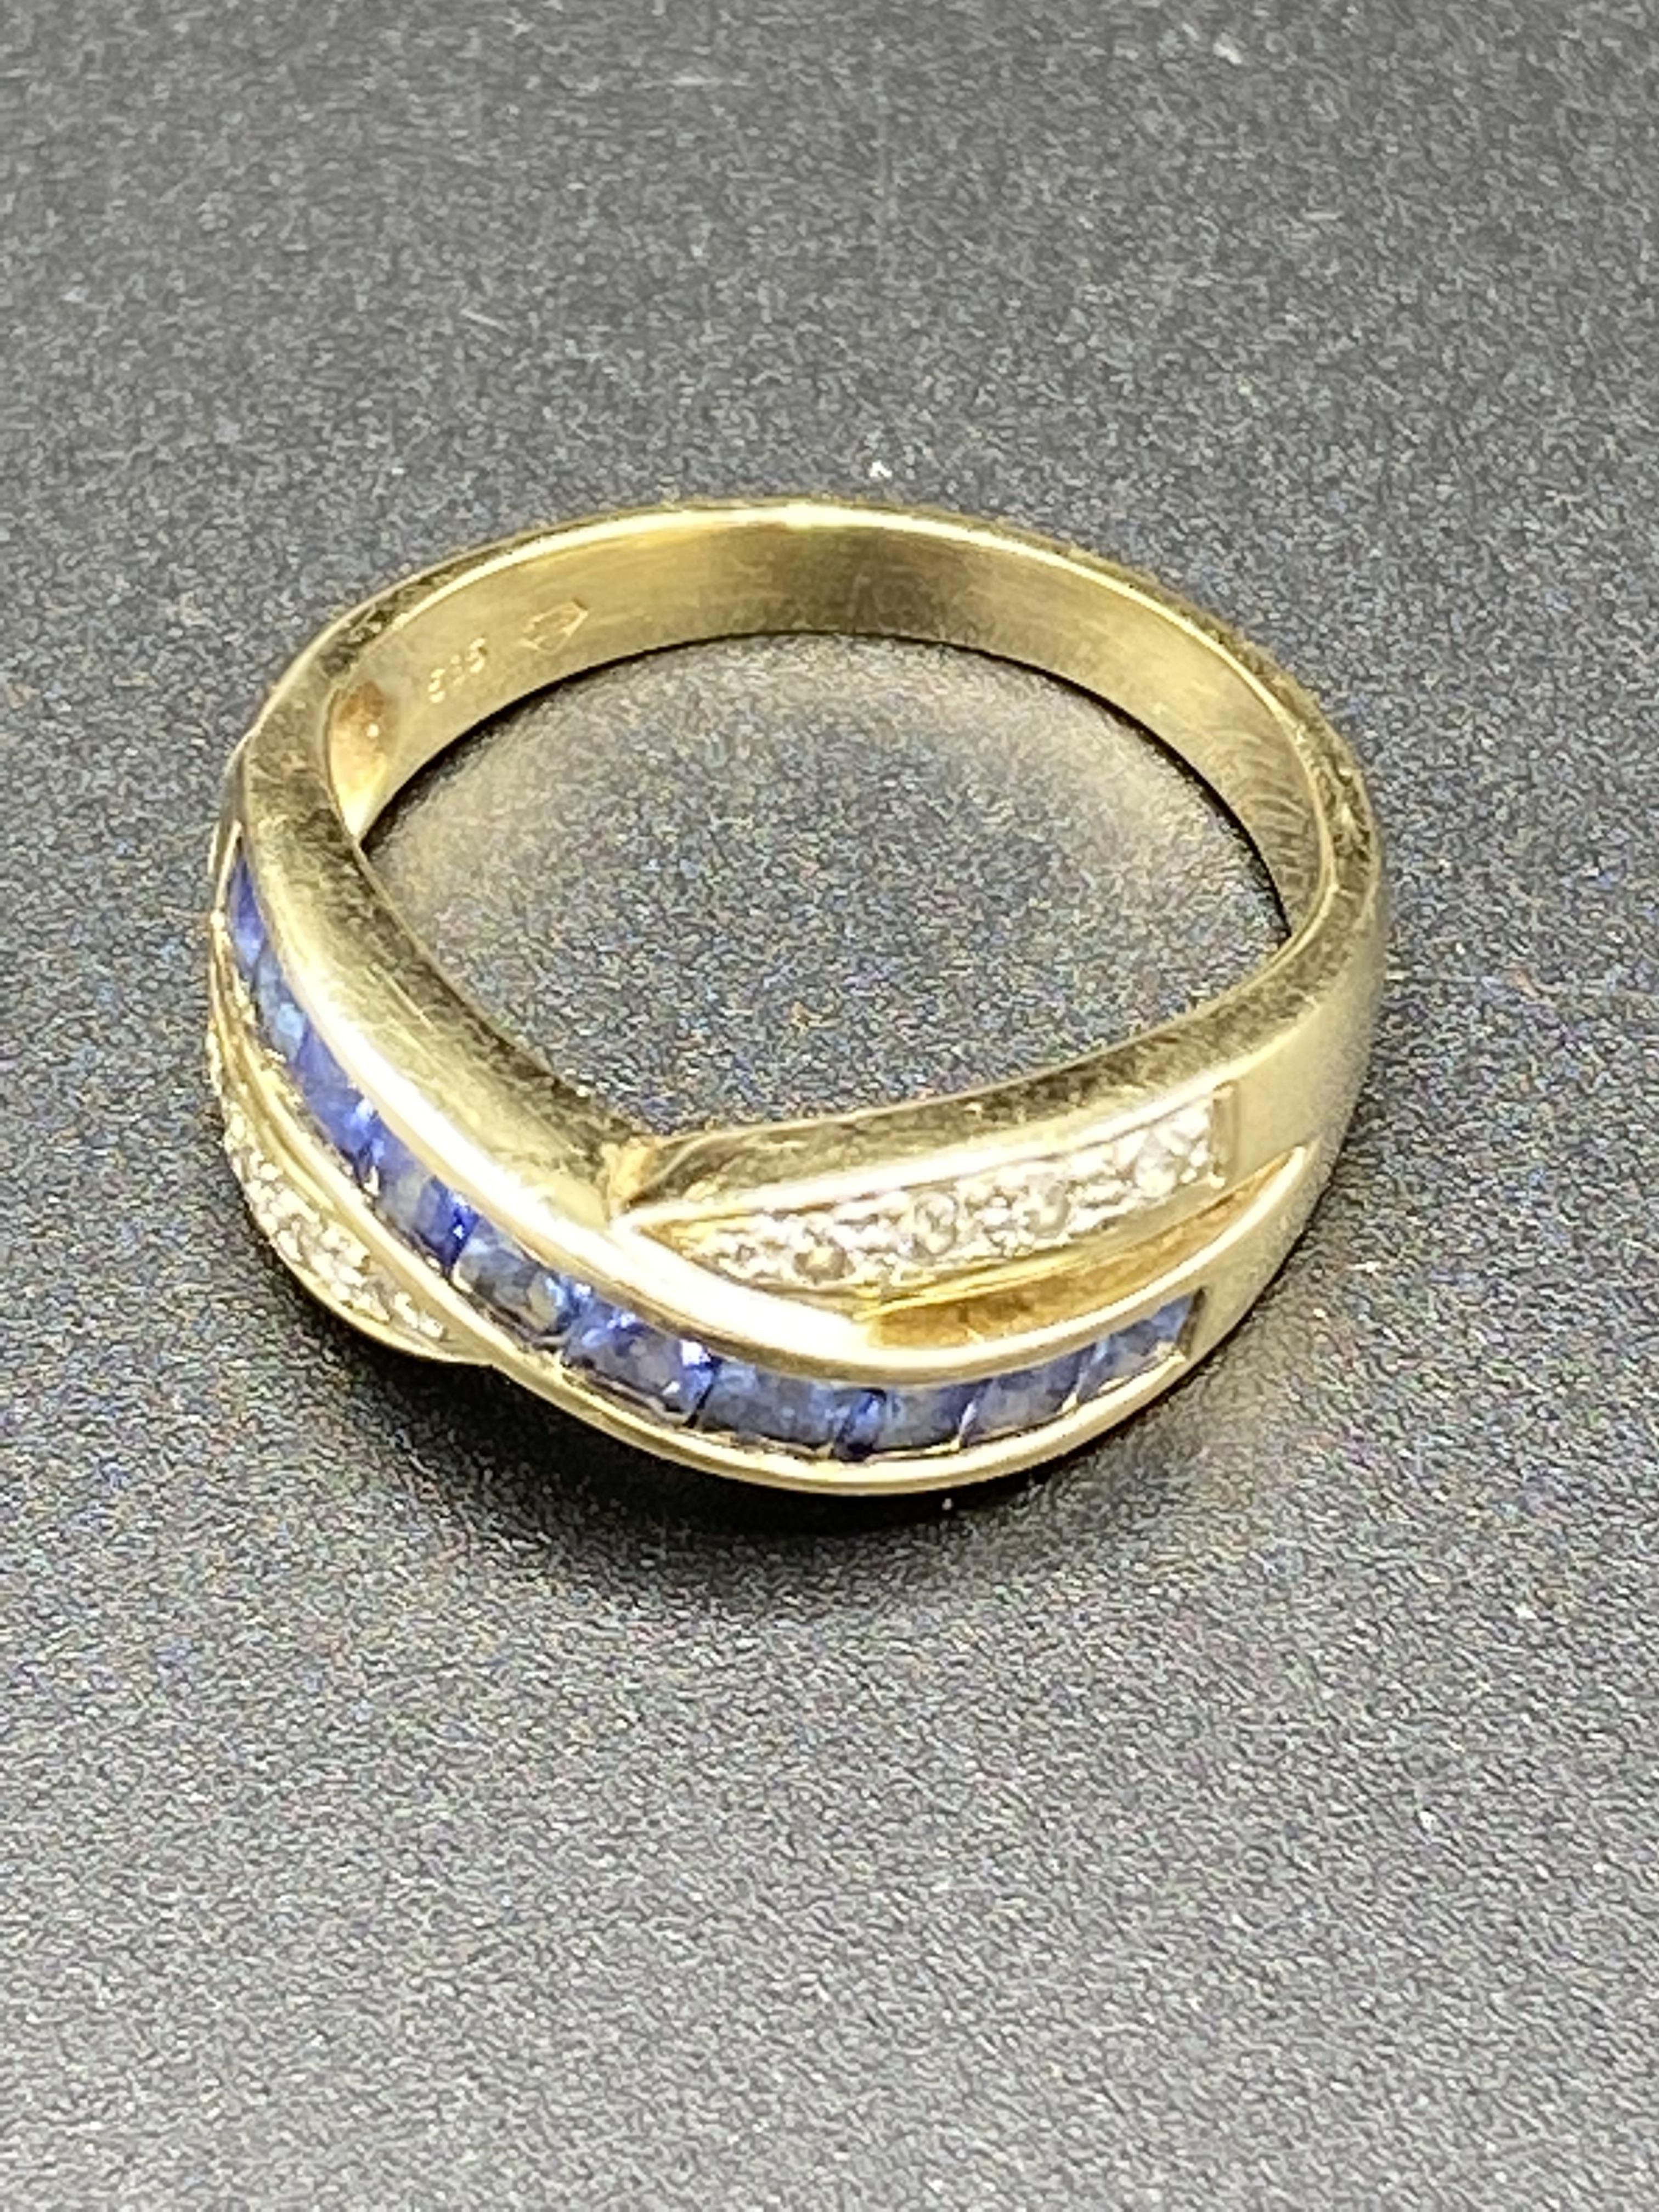 14ct gold, sapphire and diamond ring - Image 4 of 5